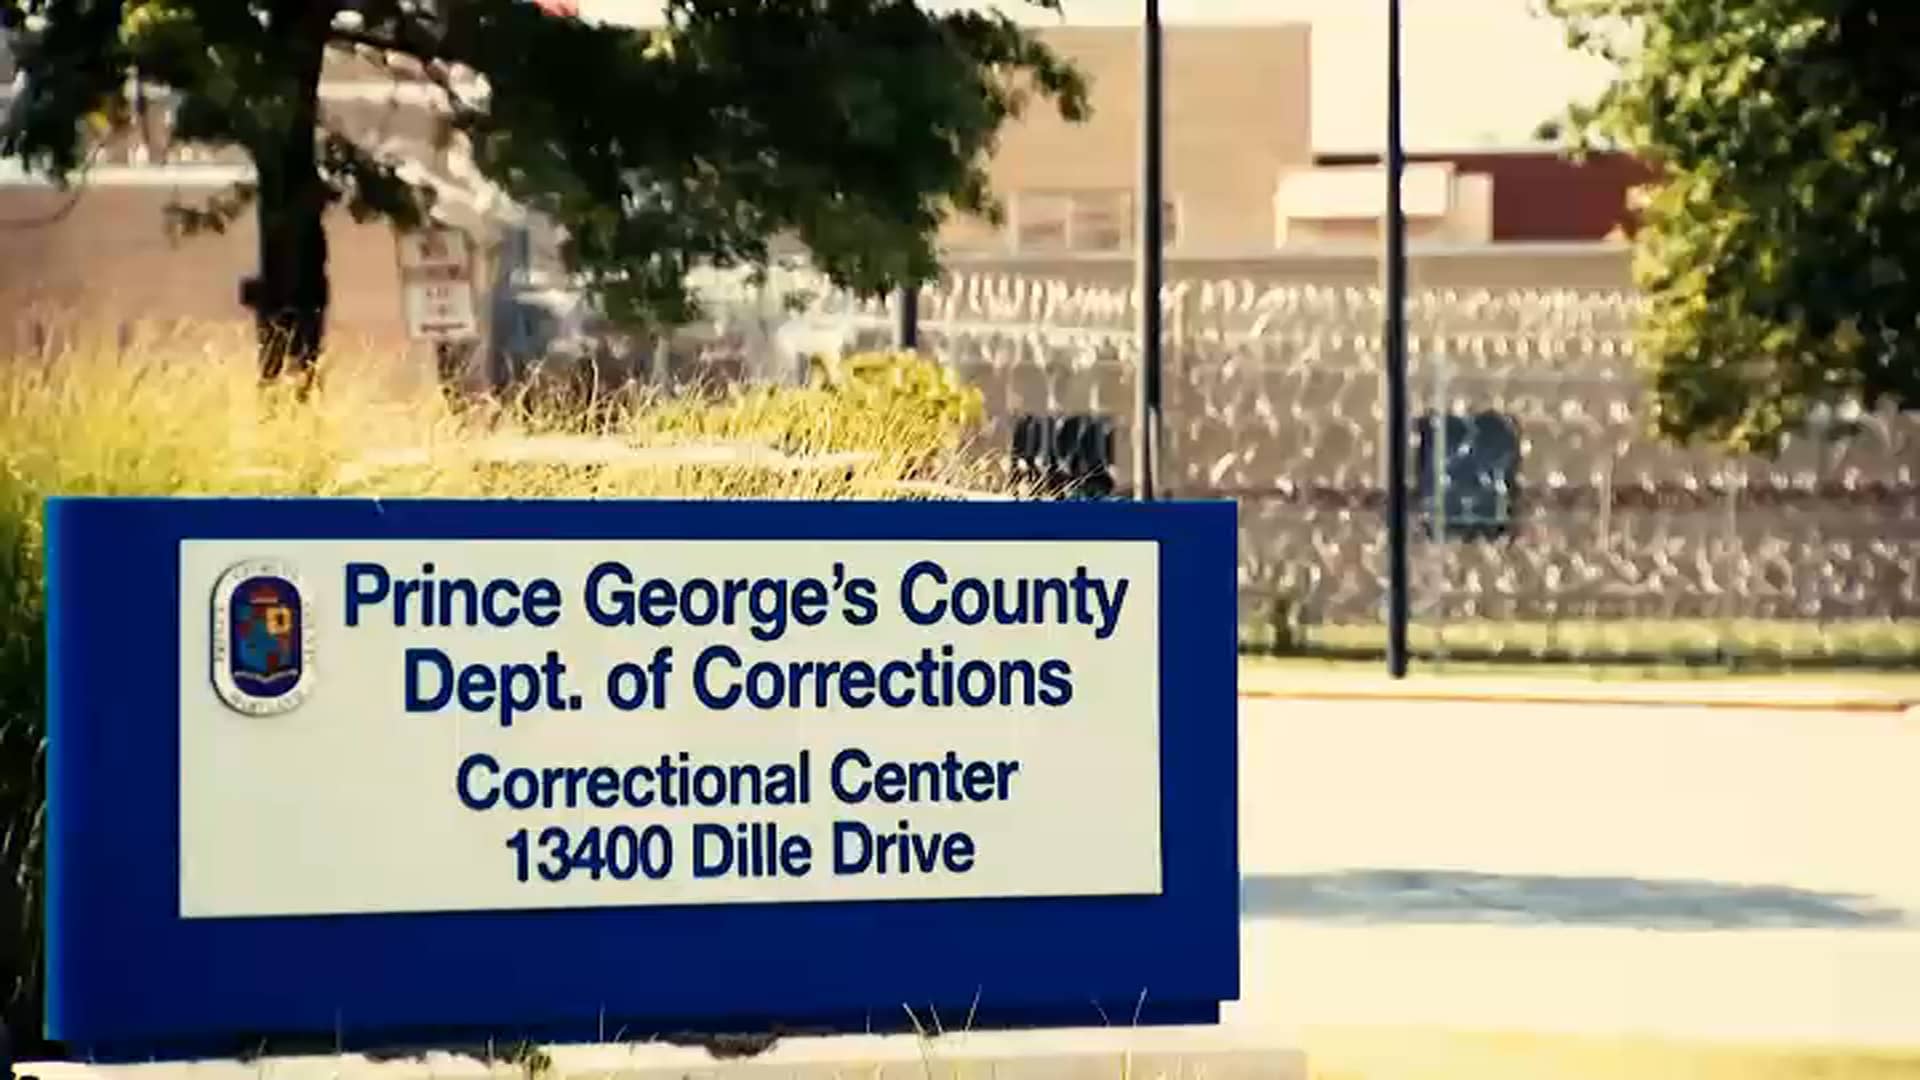 Image of Prince George's County Sheriff and Jail